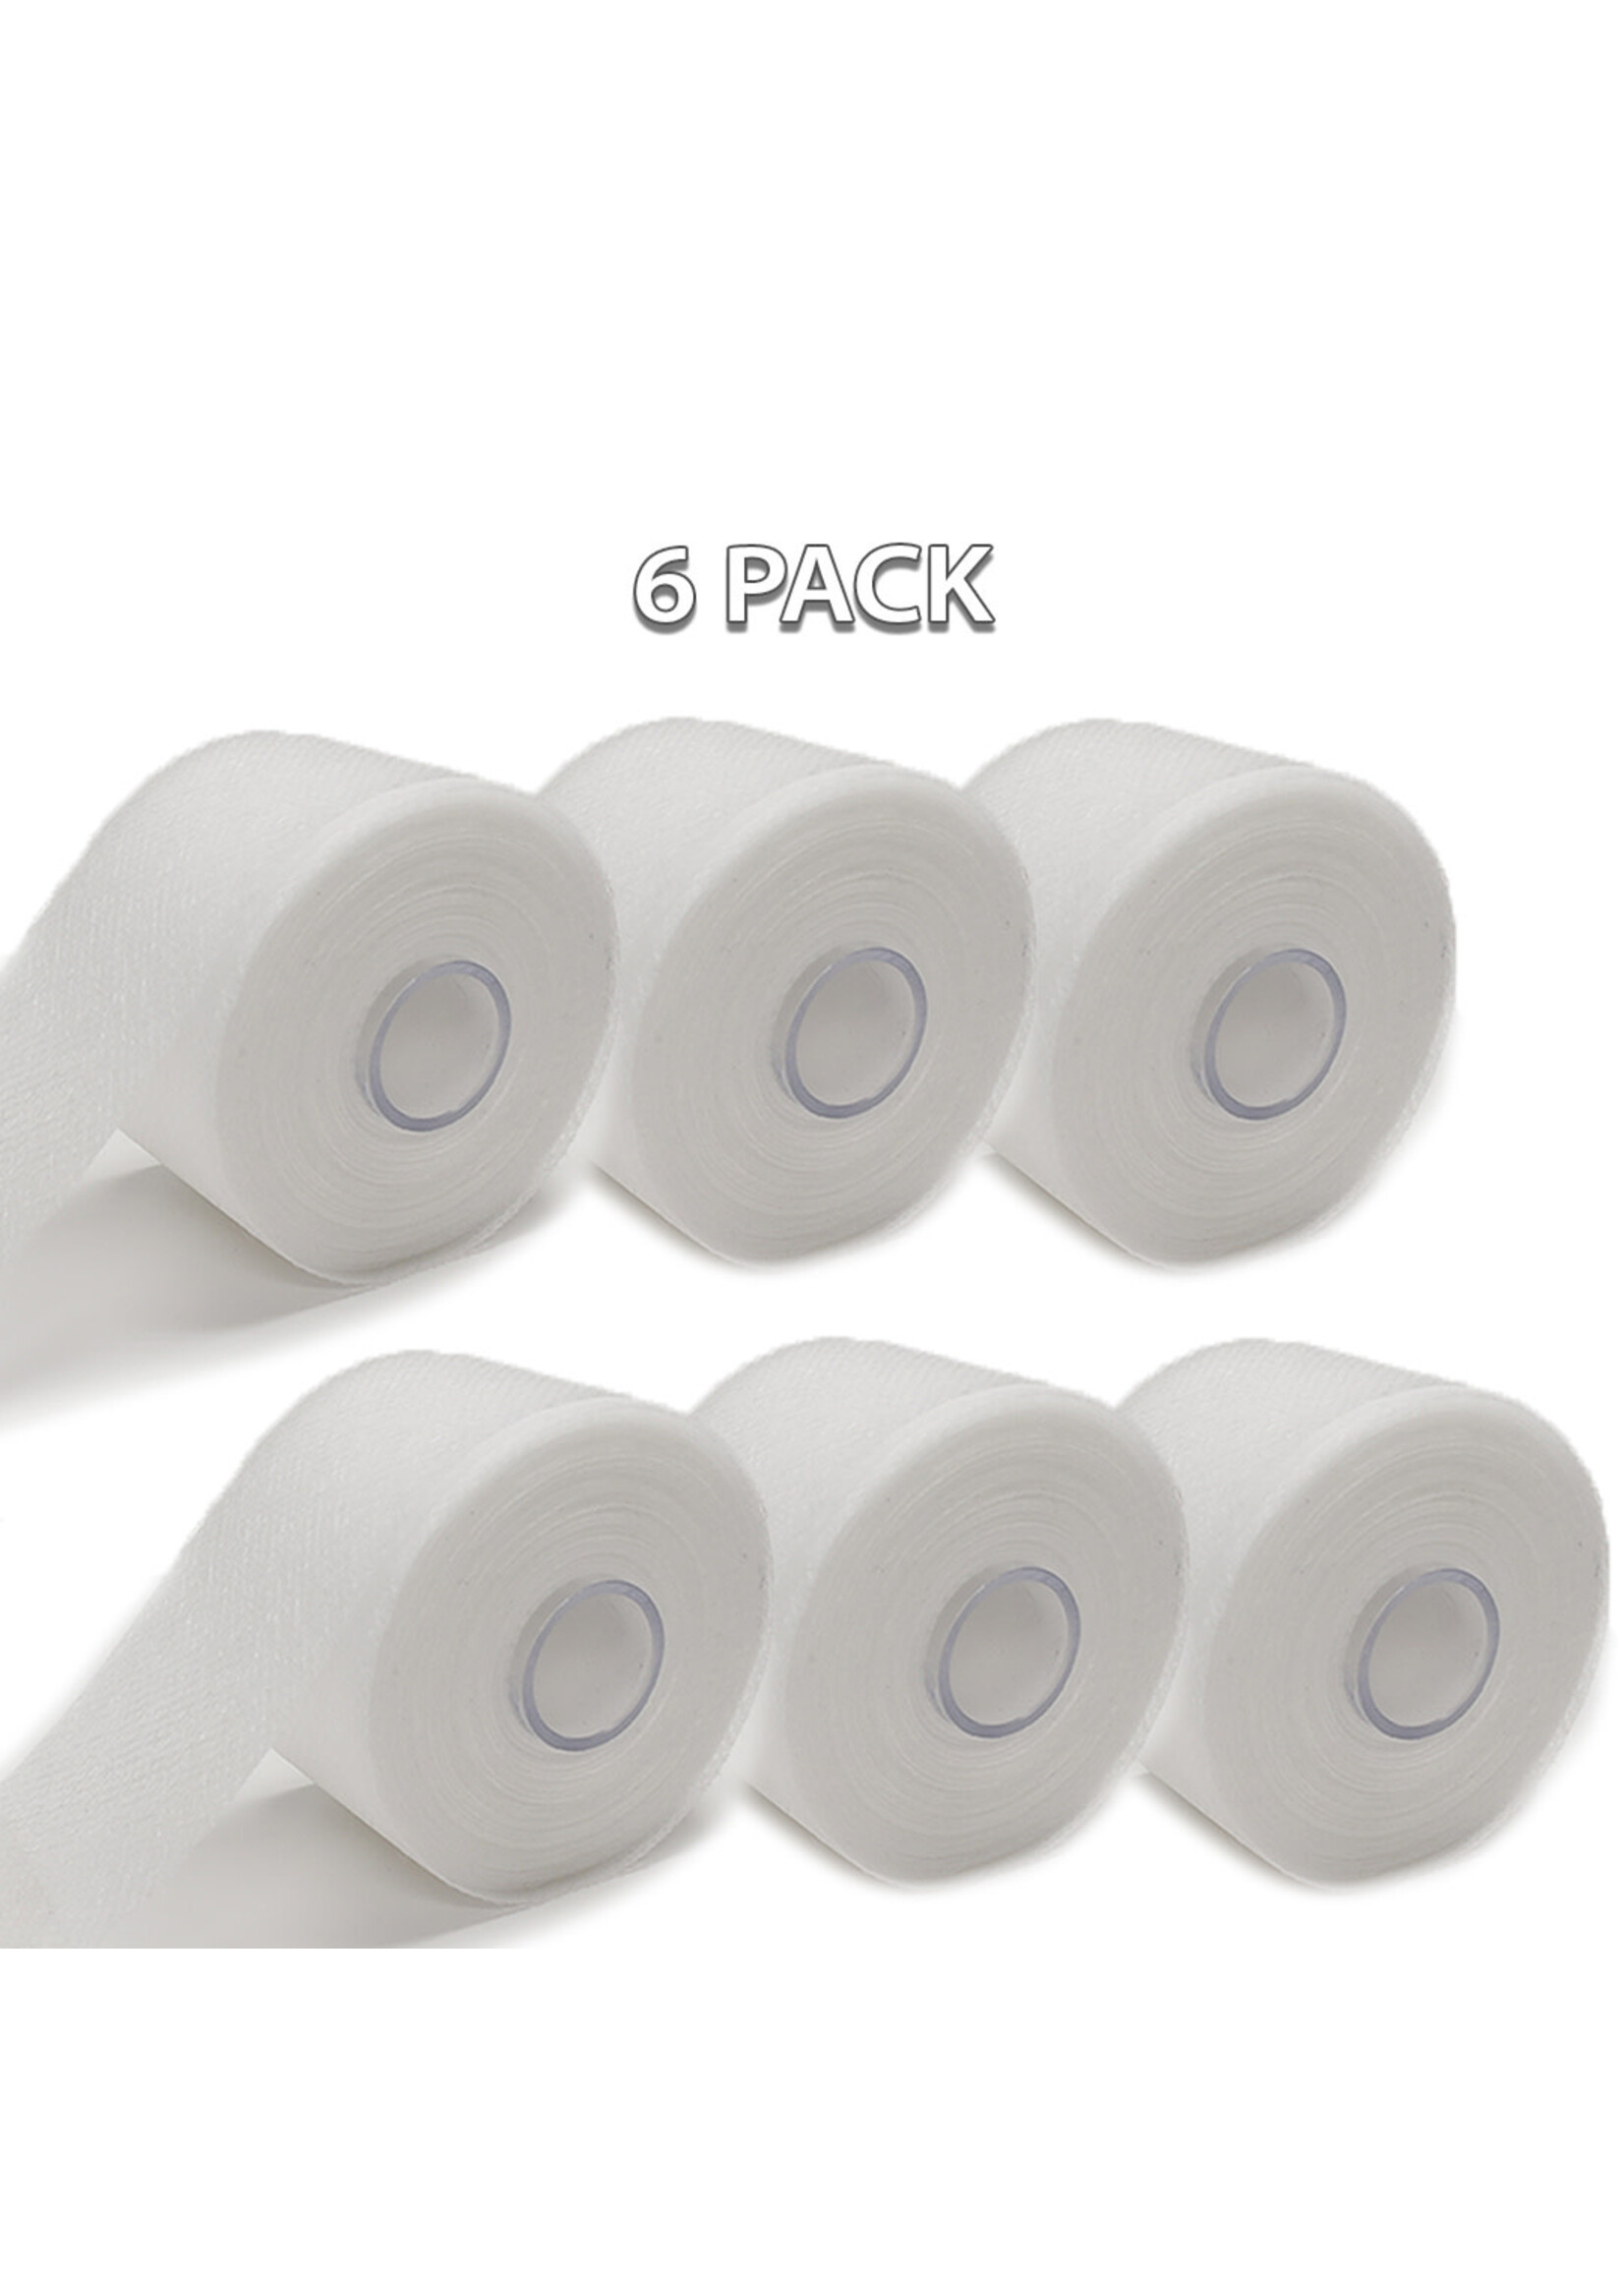 Innovative Marine NUVO ROLLER MIDSIZE REPLACEMENT ROLL 6 PACK